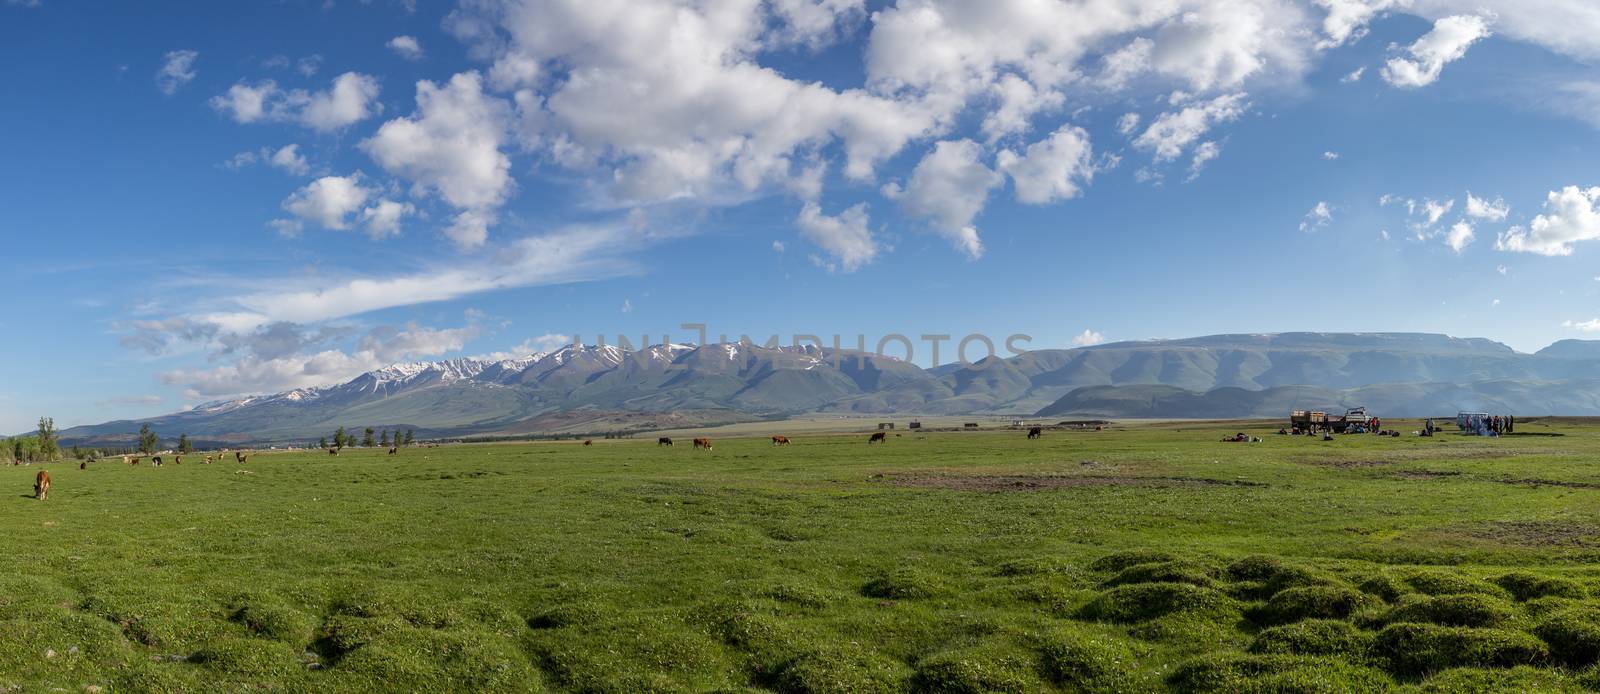 The idyllic landscape: cow grazing and tourists pack their tent in the meadow. Western Siberia, Altai mountains